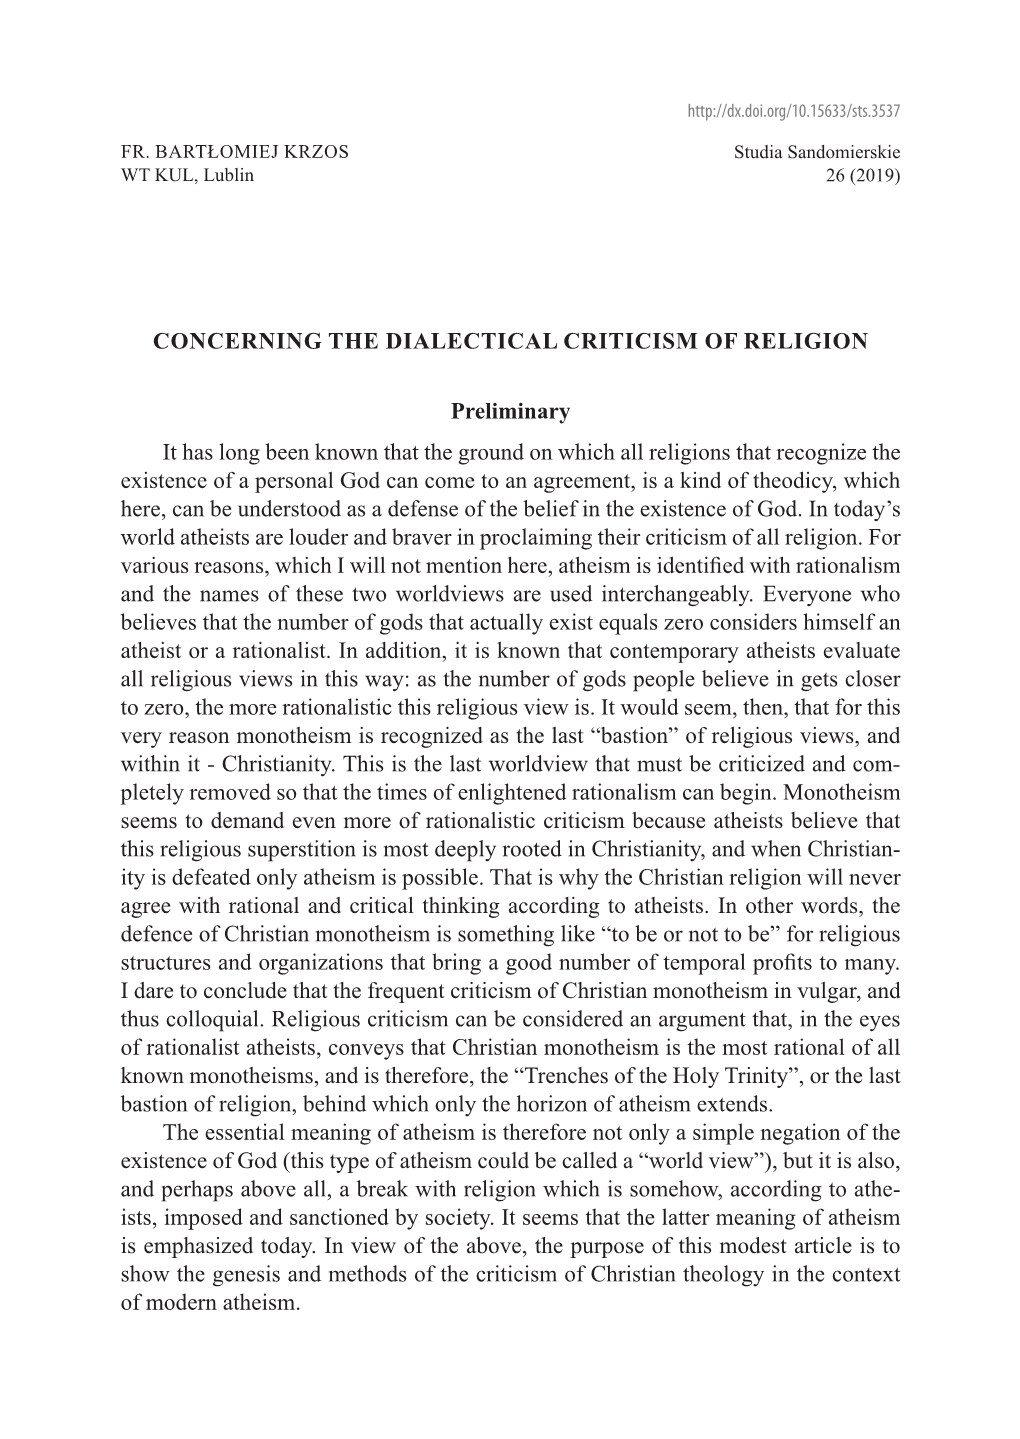 Concerning the Dialectical Critisism of Religion